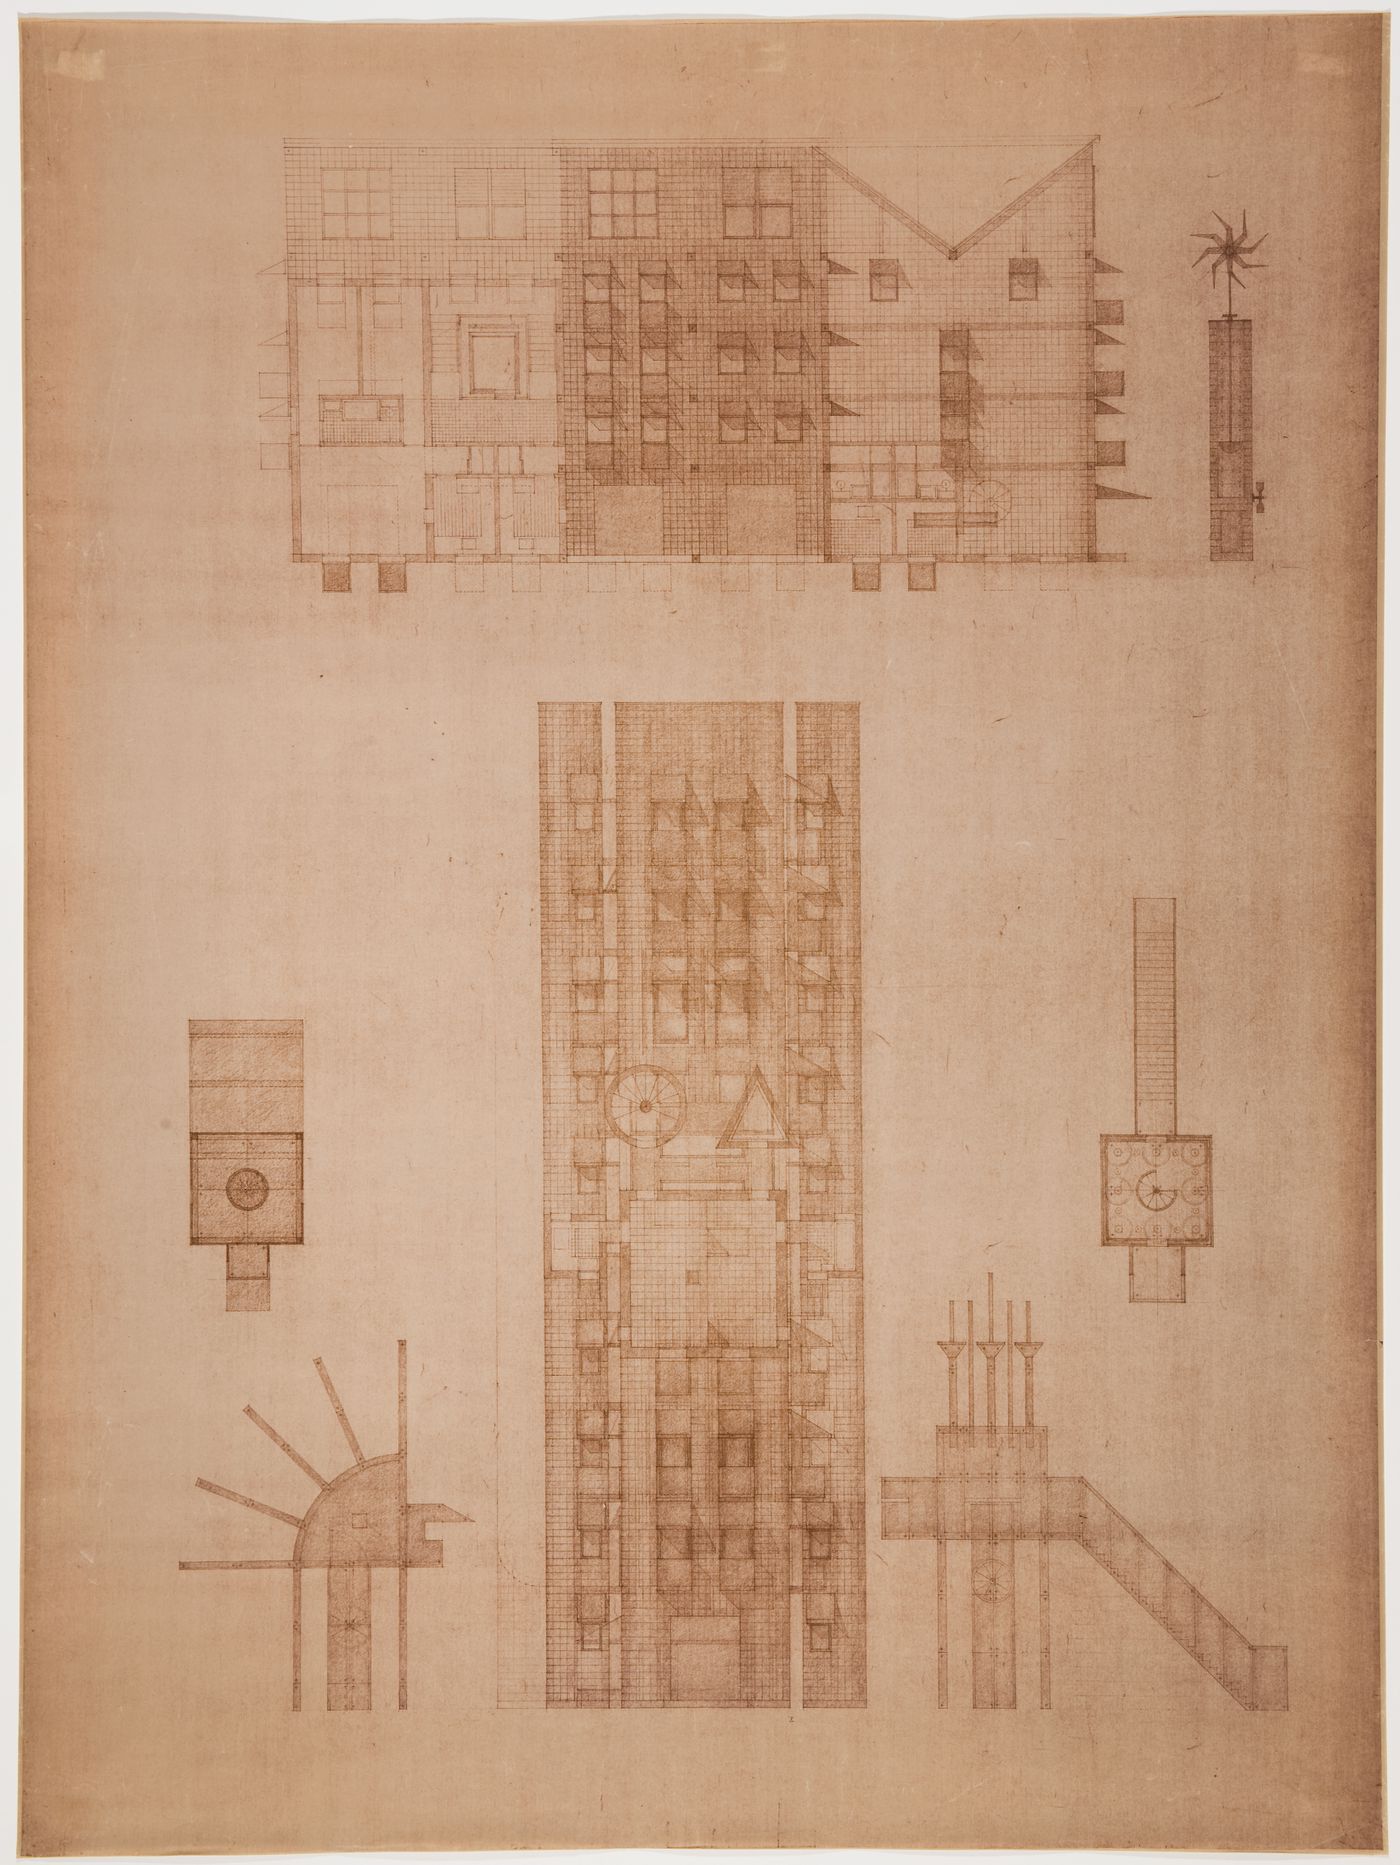 Berlin Tower: Elevations and plans